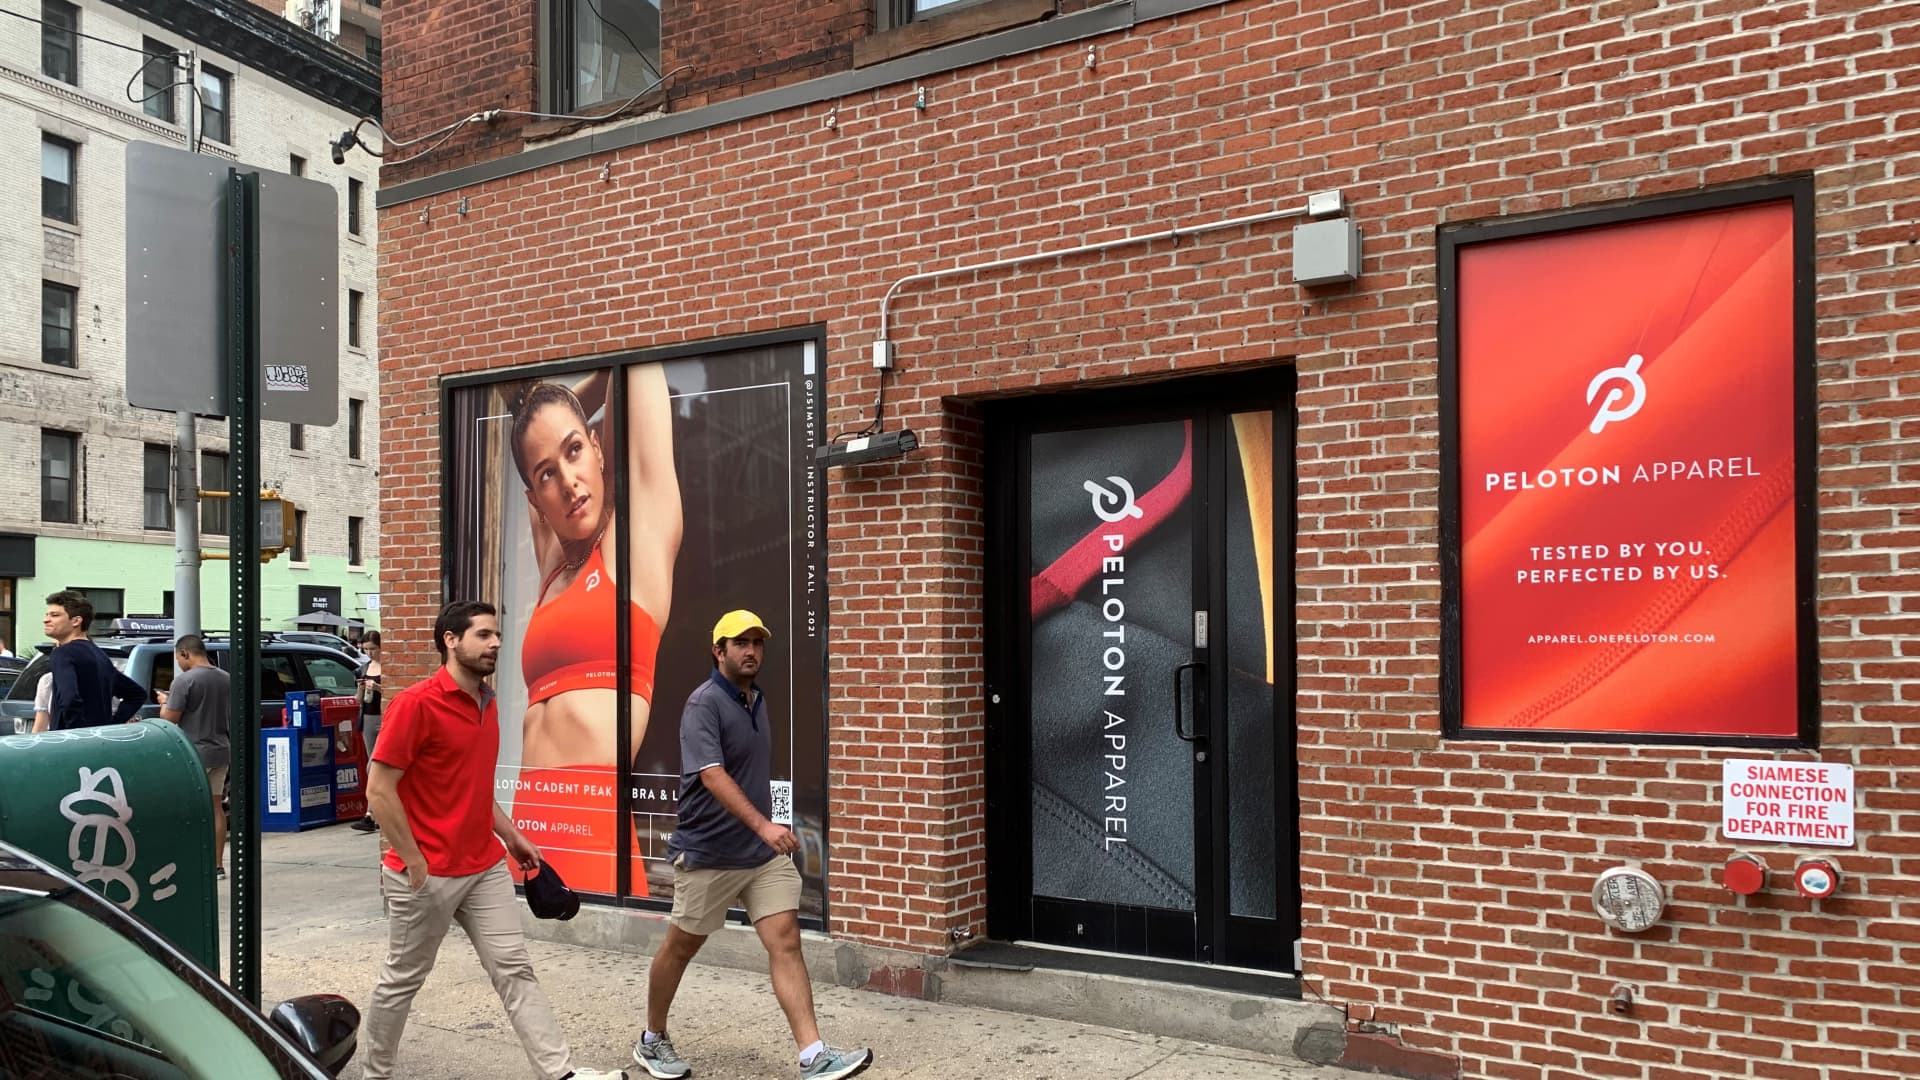 People walk by a storefront in New York City's SoHo neighborhood, where Peloton is advertising its apparel line.